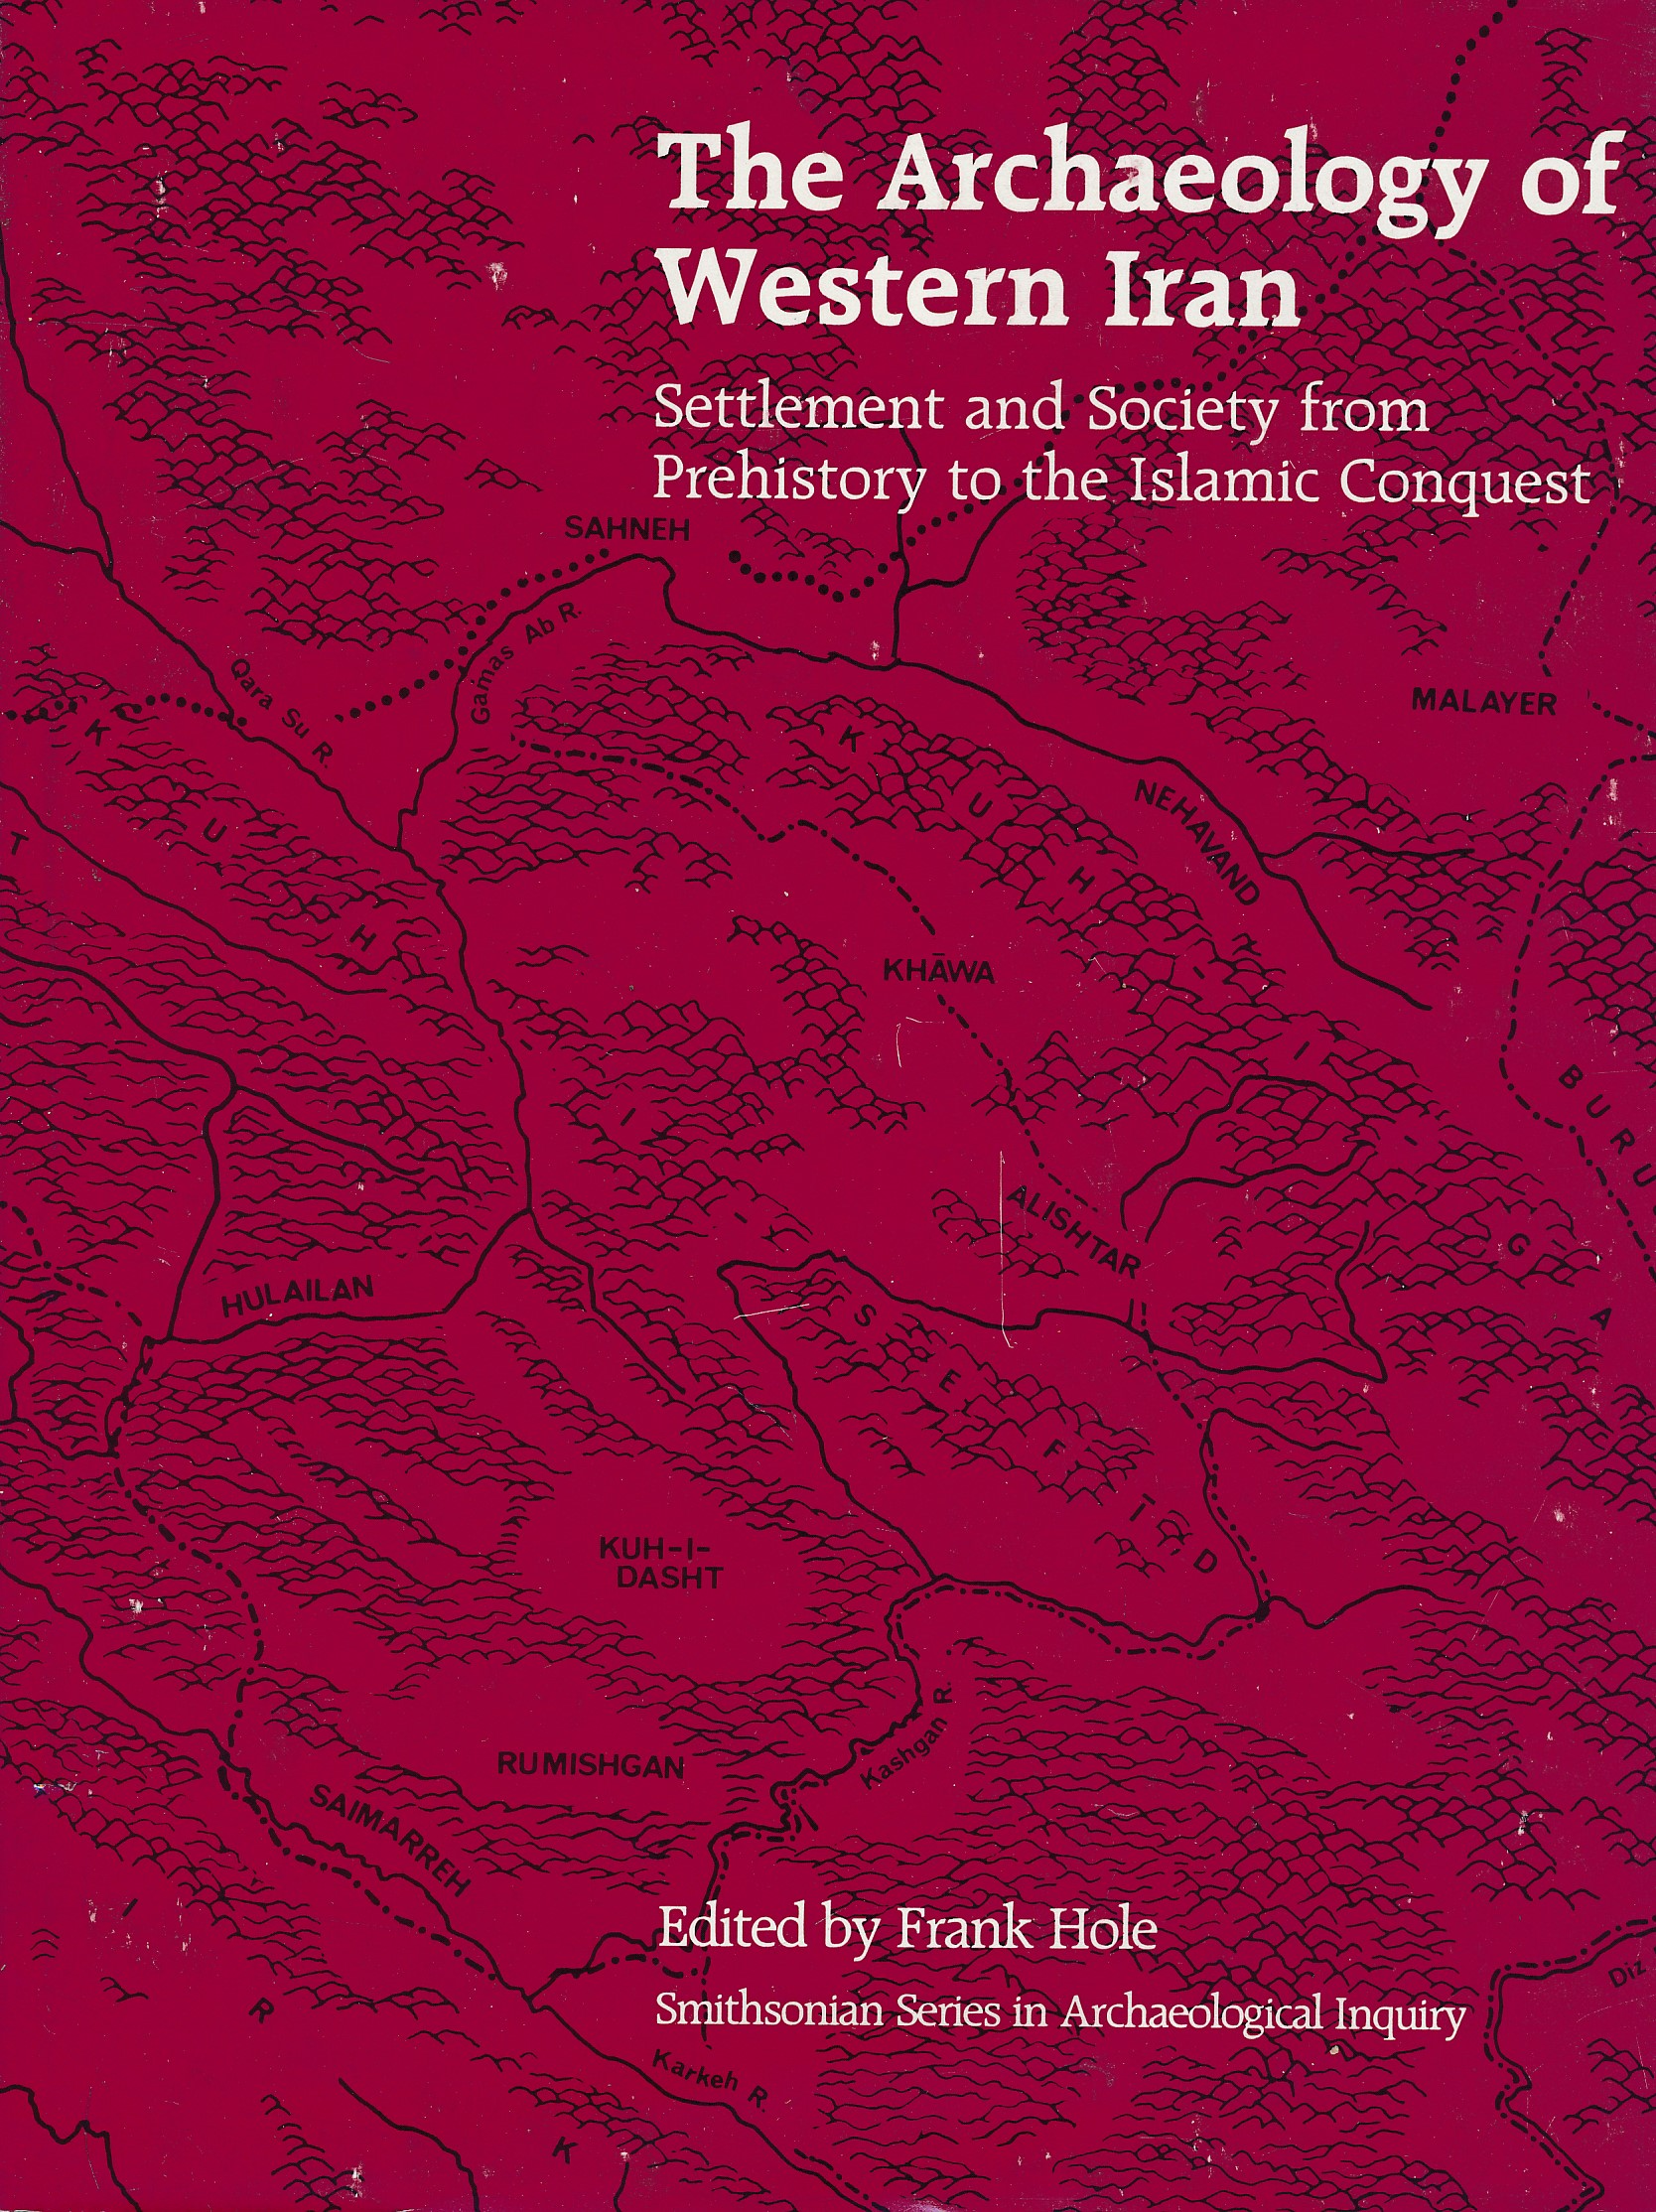 The Archaeology of Western Iran. Settlement and Society from Prehistory to the Islamic Conquest